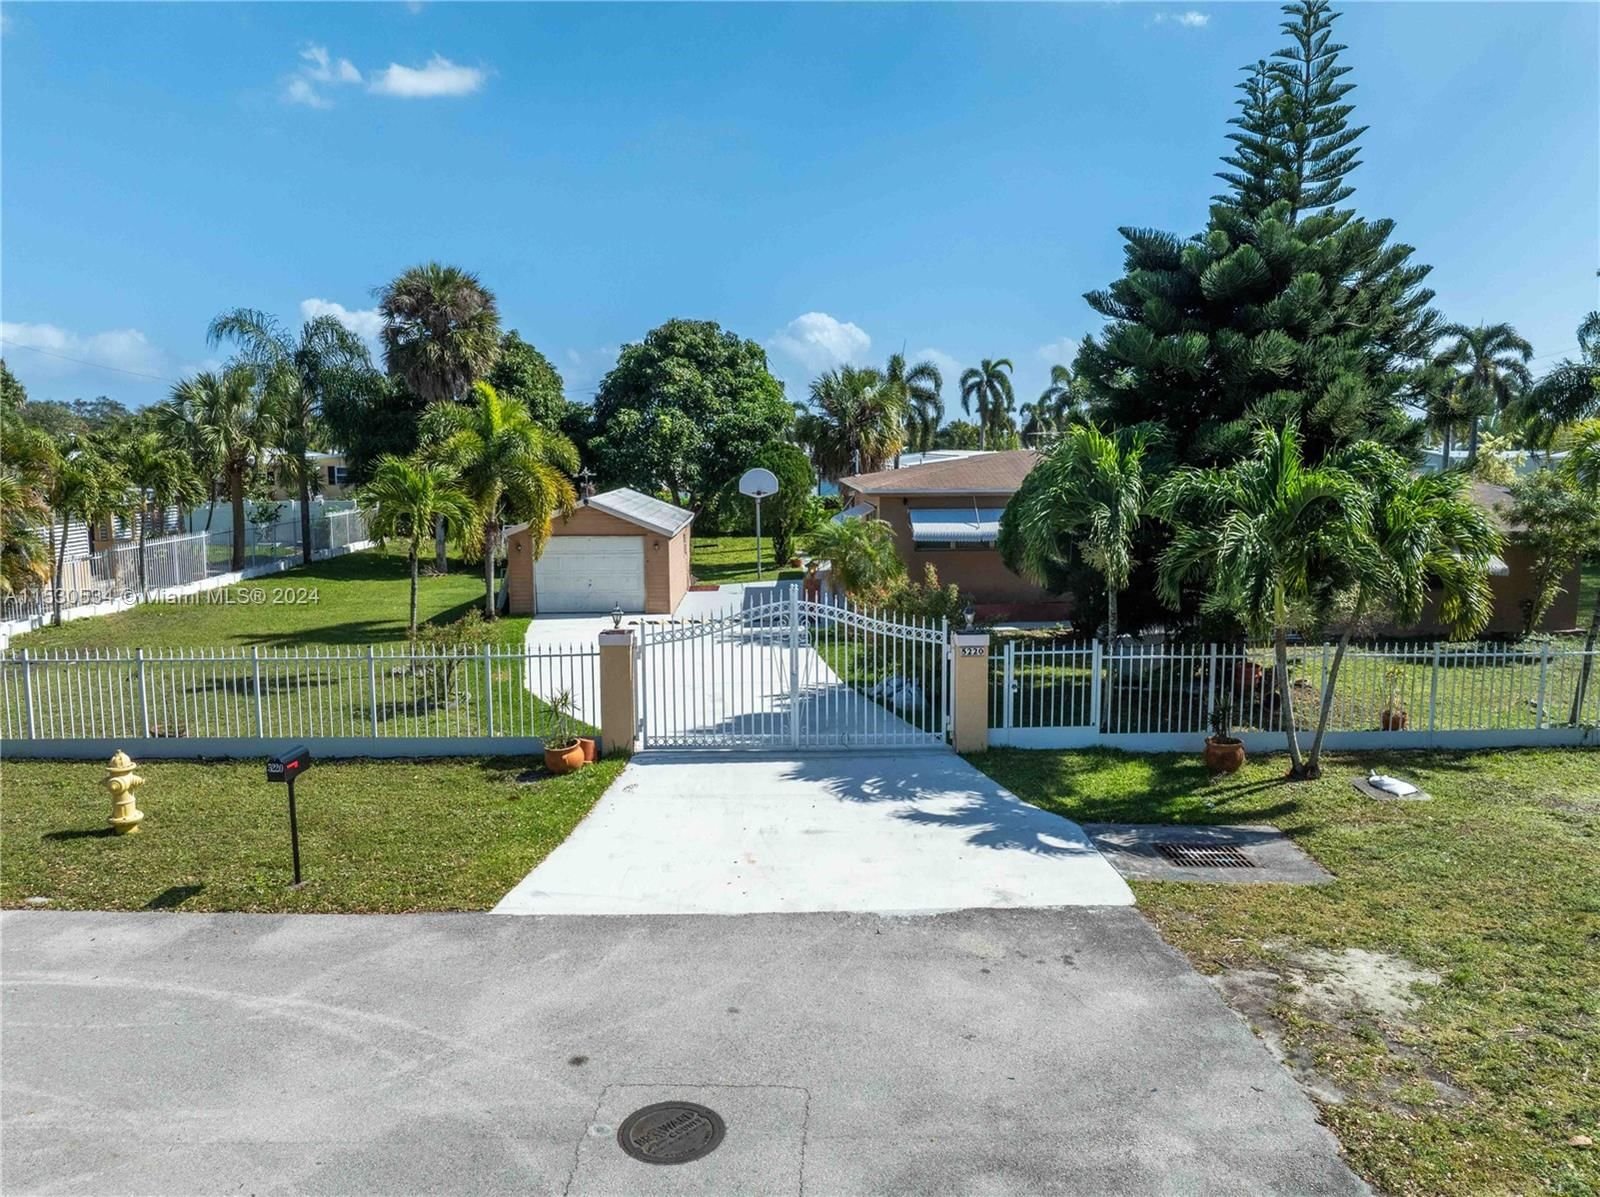 Real estate property located at 5220 26th Ave, Broward County, REED LAND CO, Dania Beach, FL